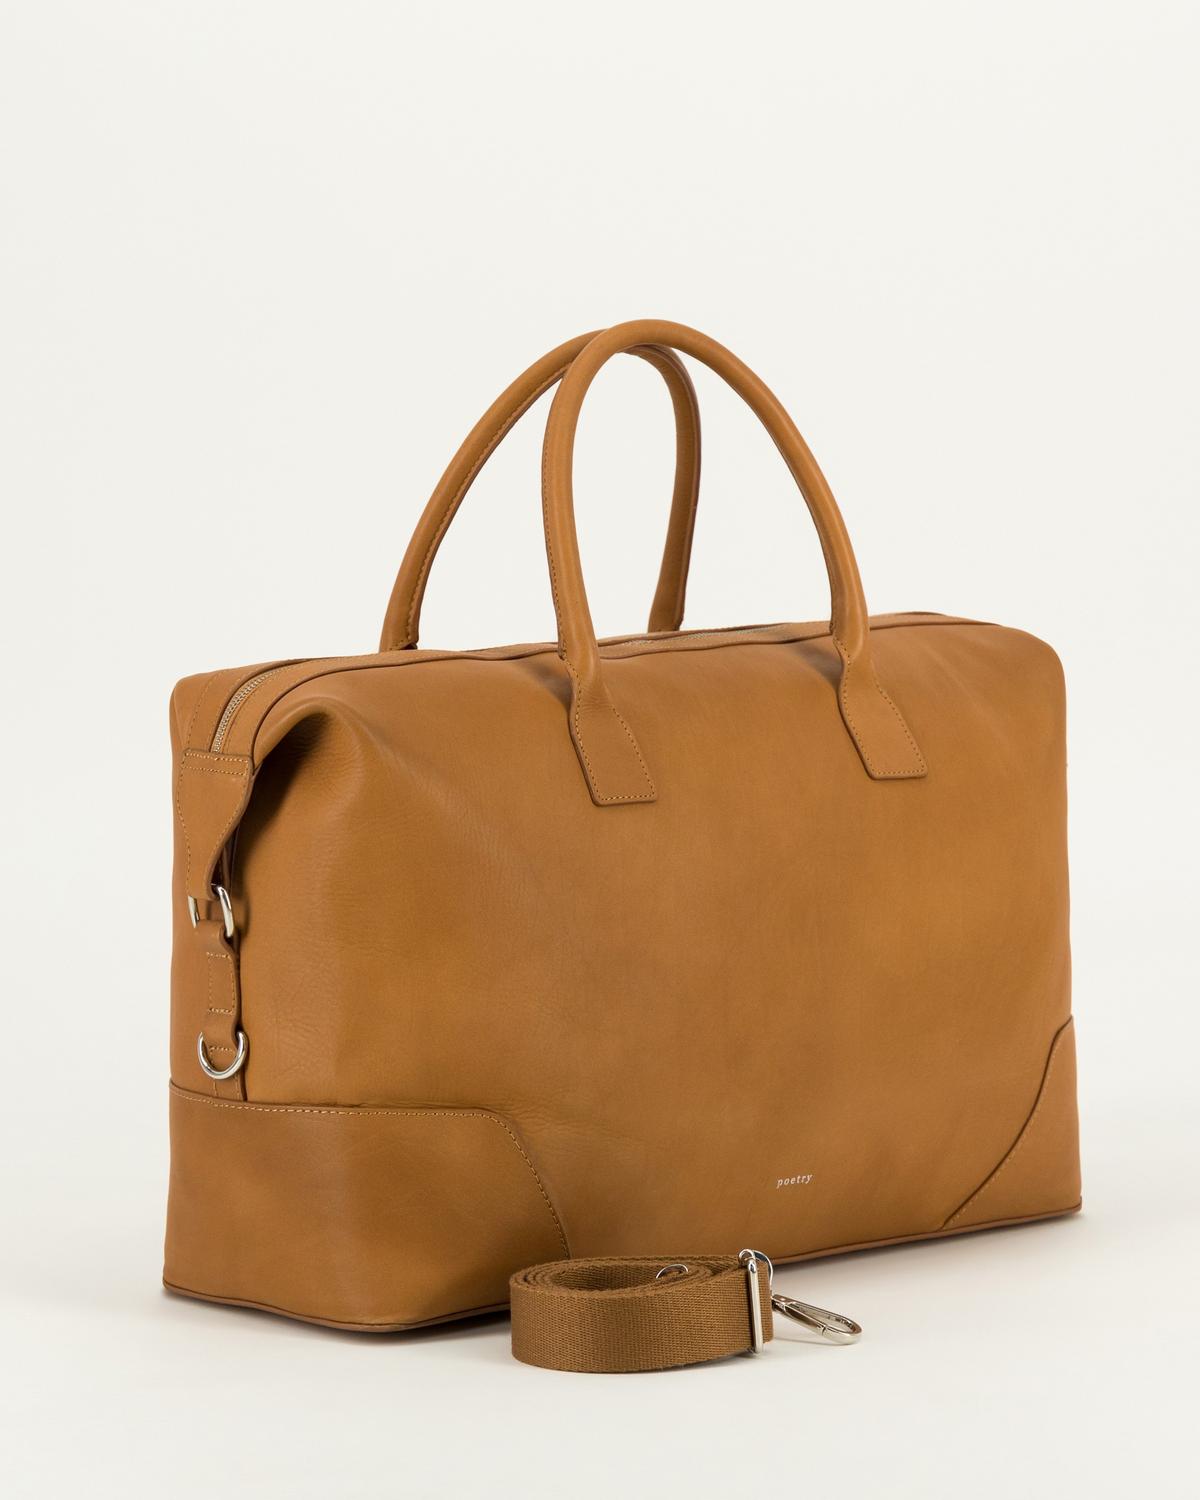 Ches Leather Weekender -  Tan